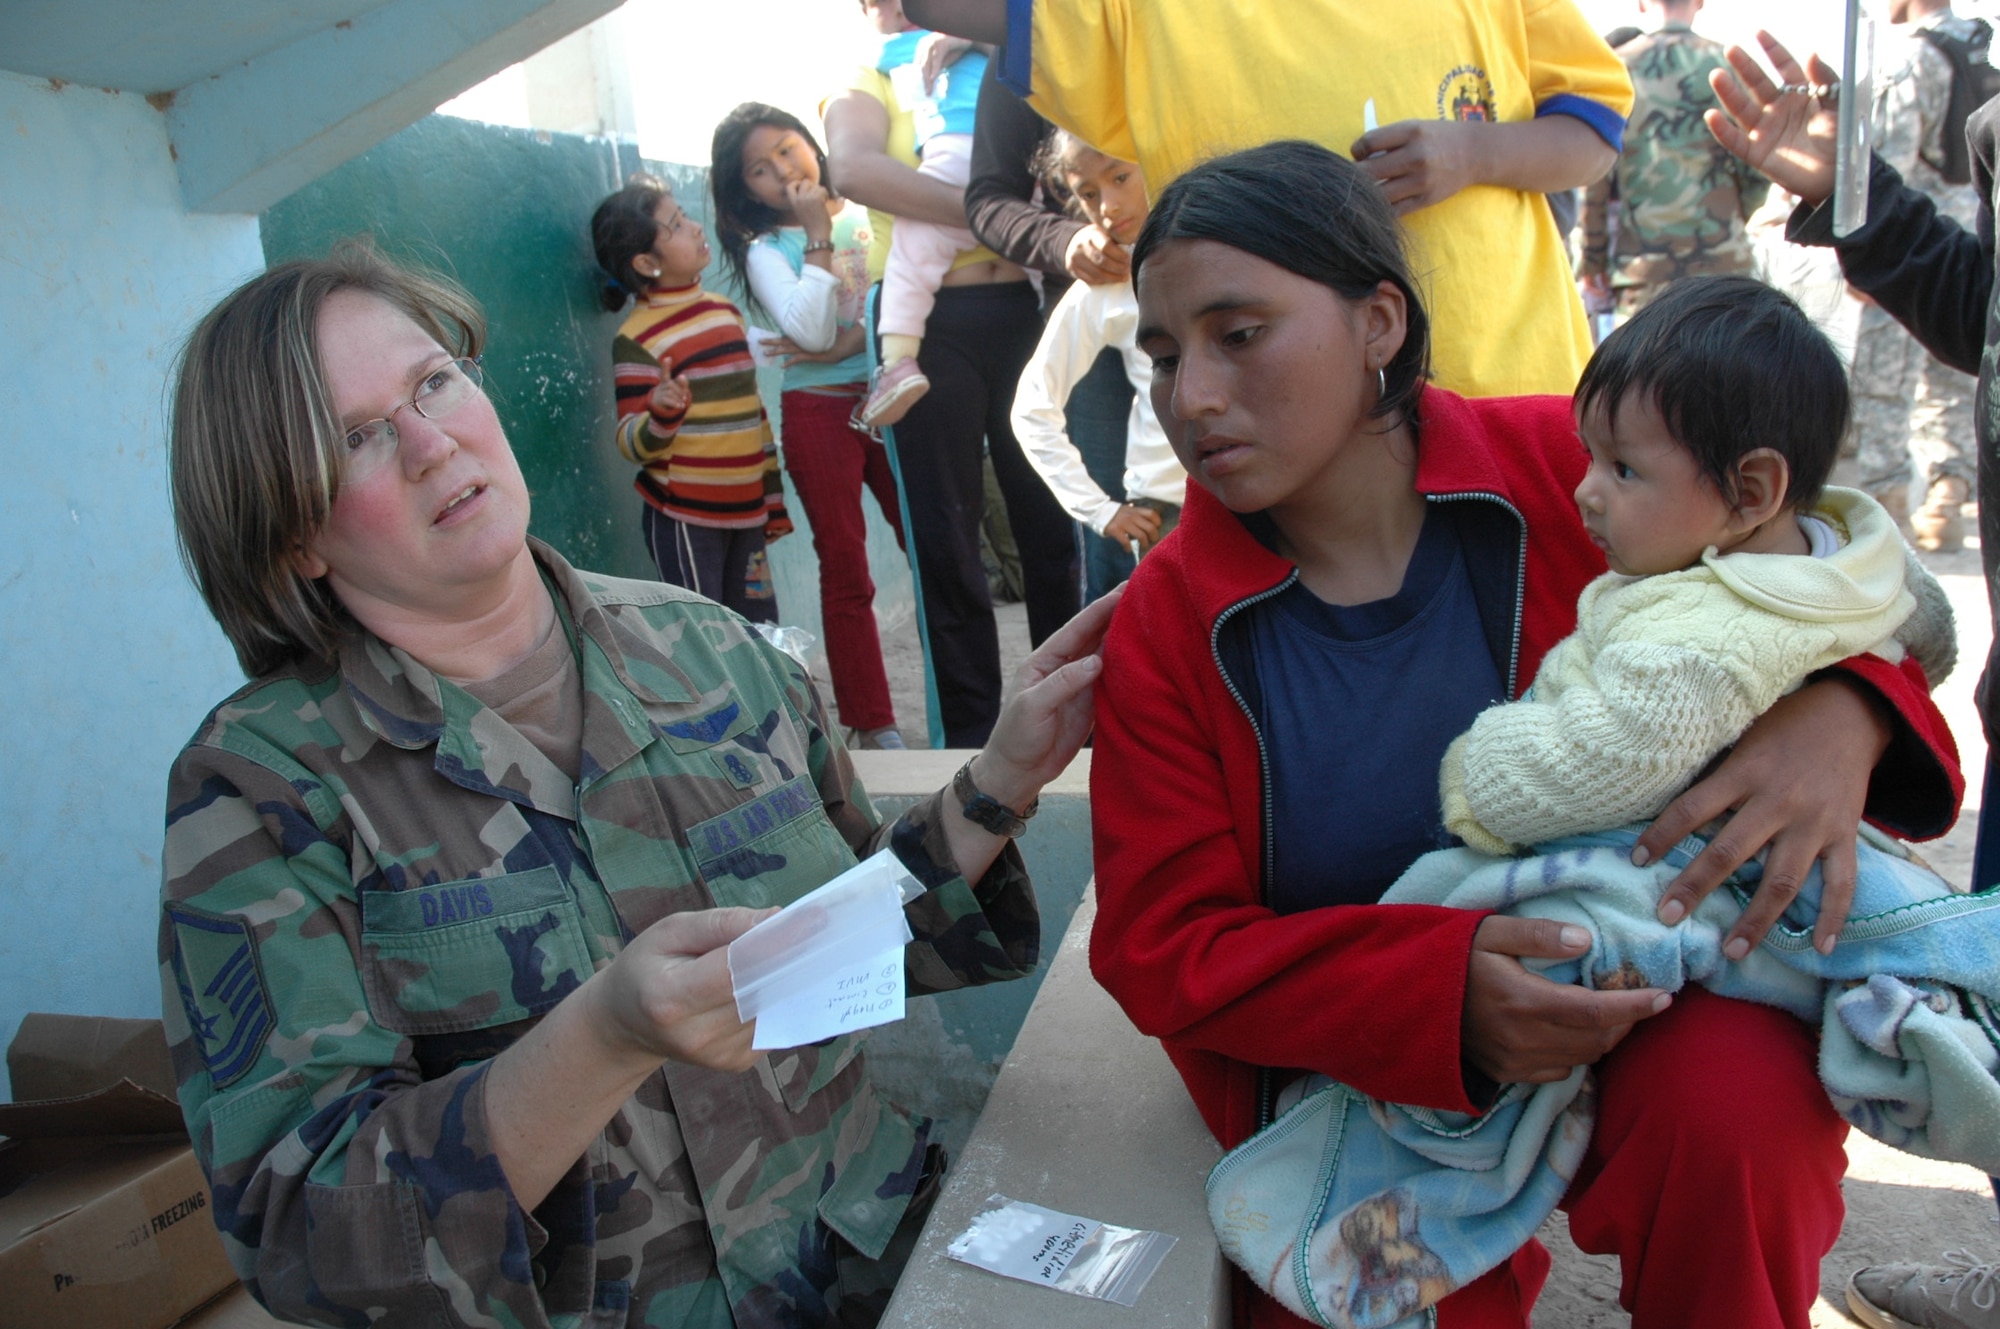 PISCO, Peru -- Air Force Master Sgt. Deborah Davis, task force NCOIC for the humanitarian mission here, explains a prescription to a patient at the medical site established by task force members. At the site, medical personnel provide basic medical care and medicines to those suffering following the 8.0 magnitude earthquake that devastated the region Aug. 15. The medical team treated more than 500 people during the first two days of the mission. (U.S. Army photo by Spec. Grant Vaught)